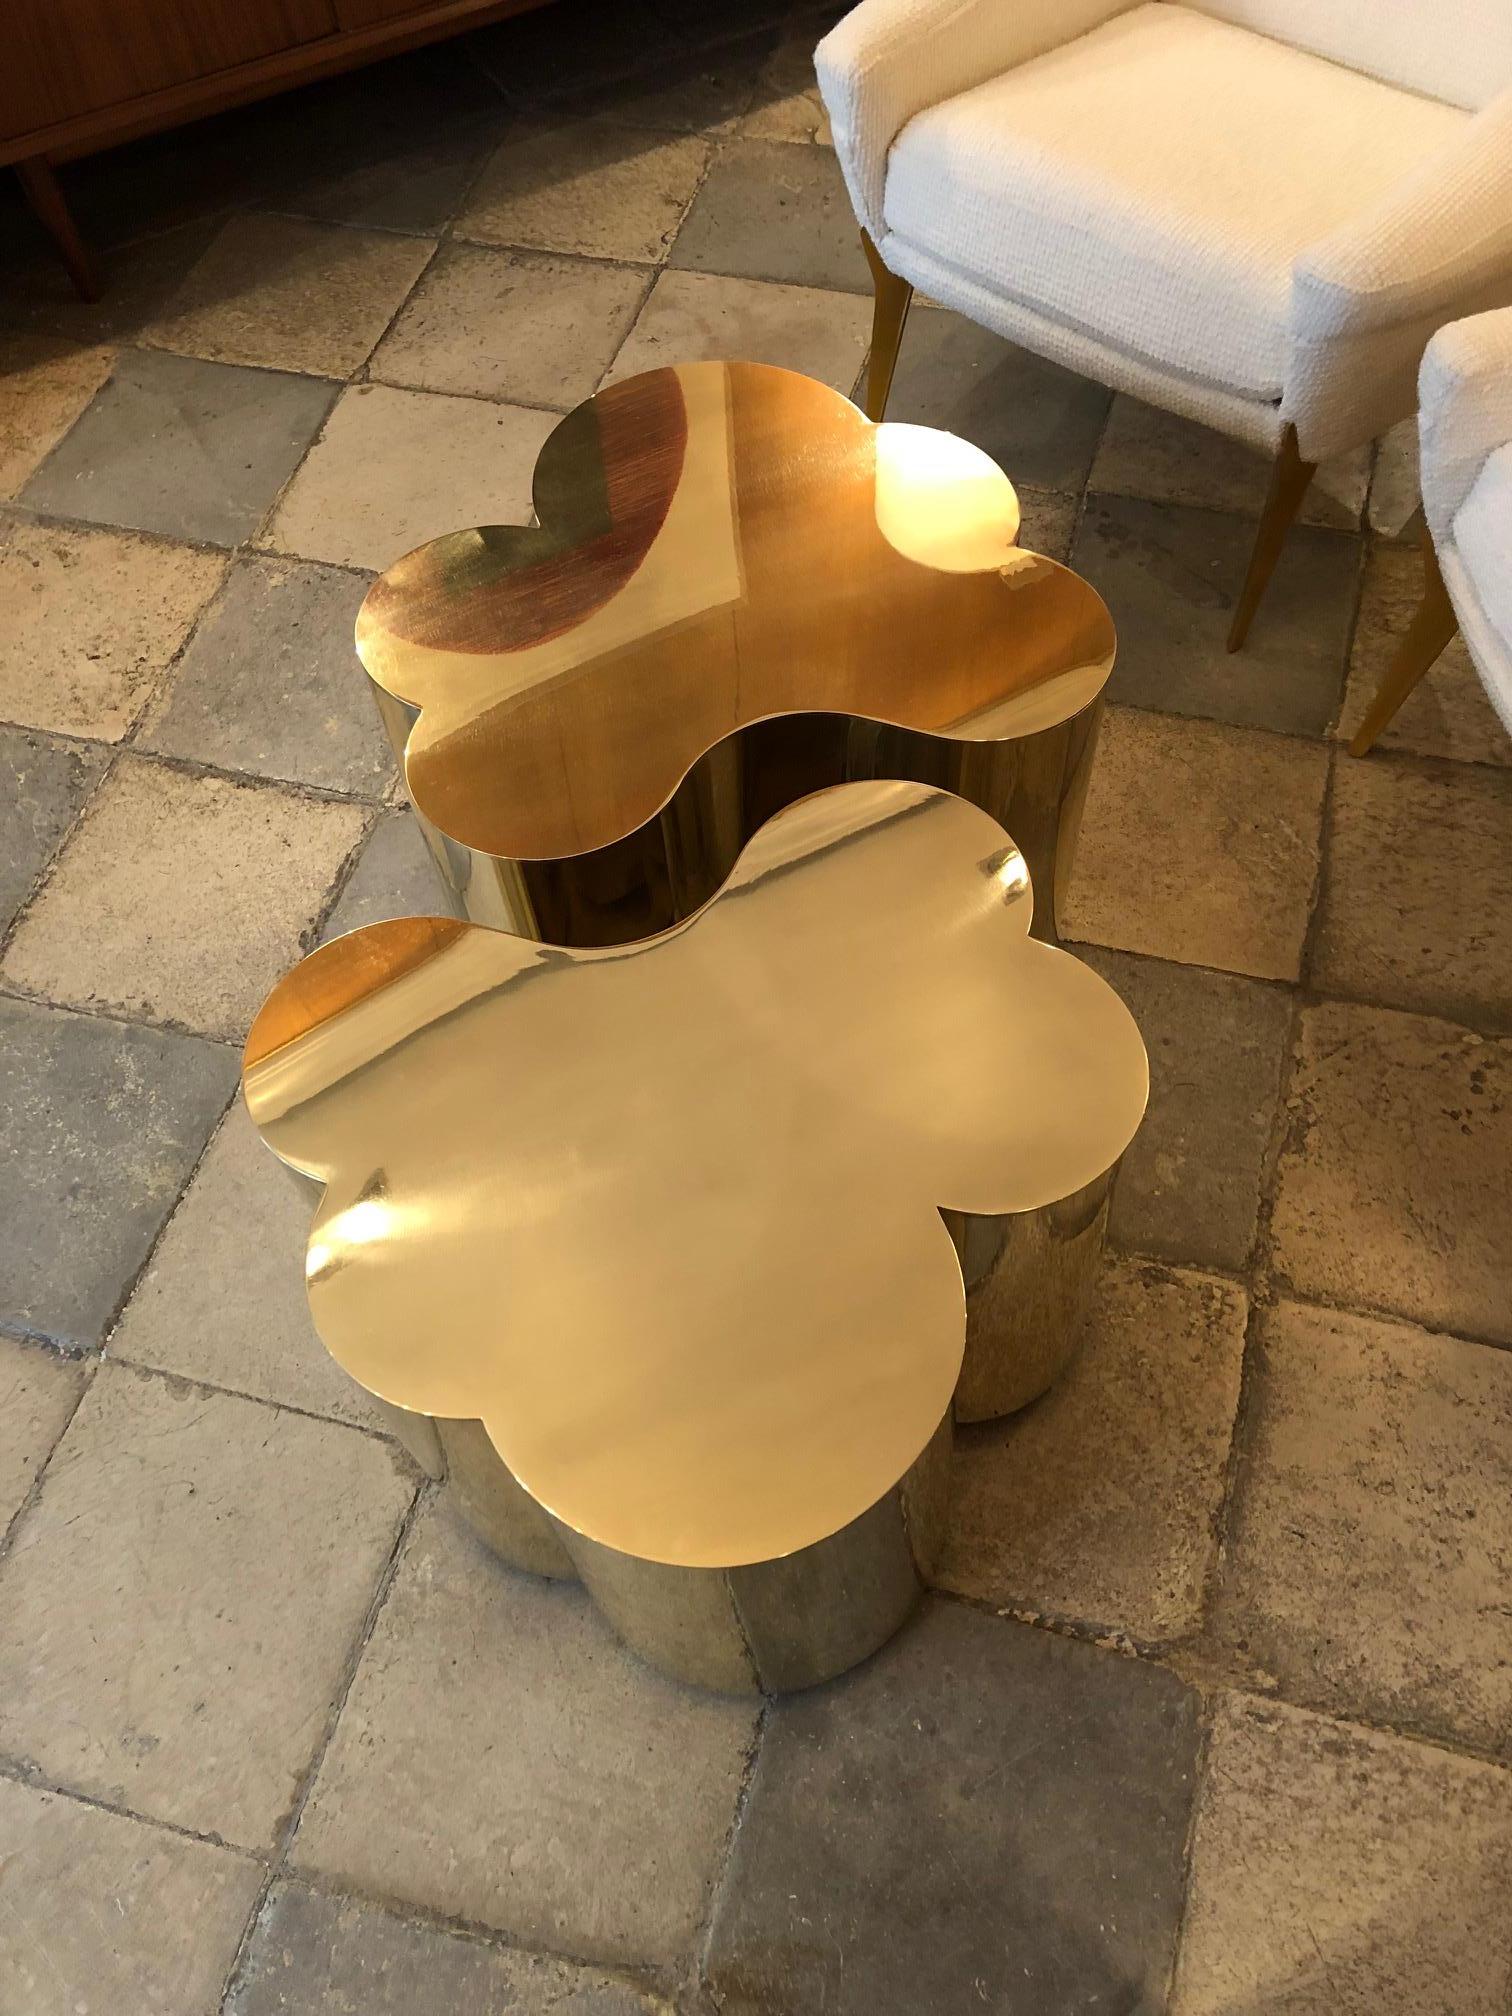 Two tables in brass designed by Edouard De La Marque. They can fit together forming a large coffee table or on each side as end tables. Dimensions indicated below are per table (as shown on the main picture, overall dimensions are: L 108, D 78 cm